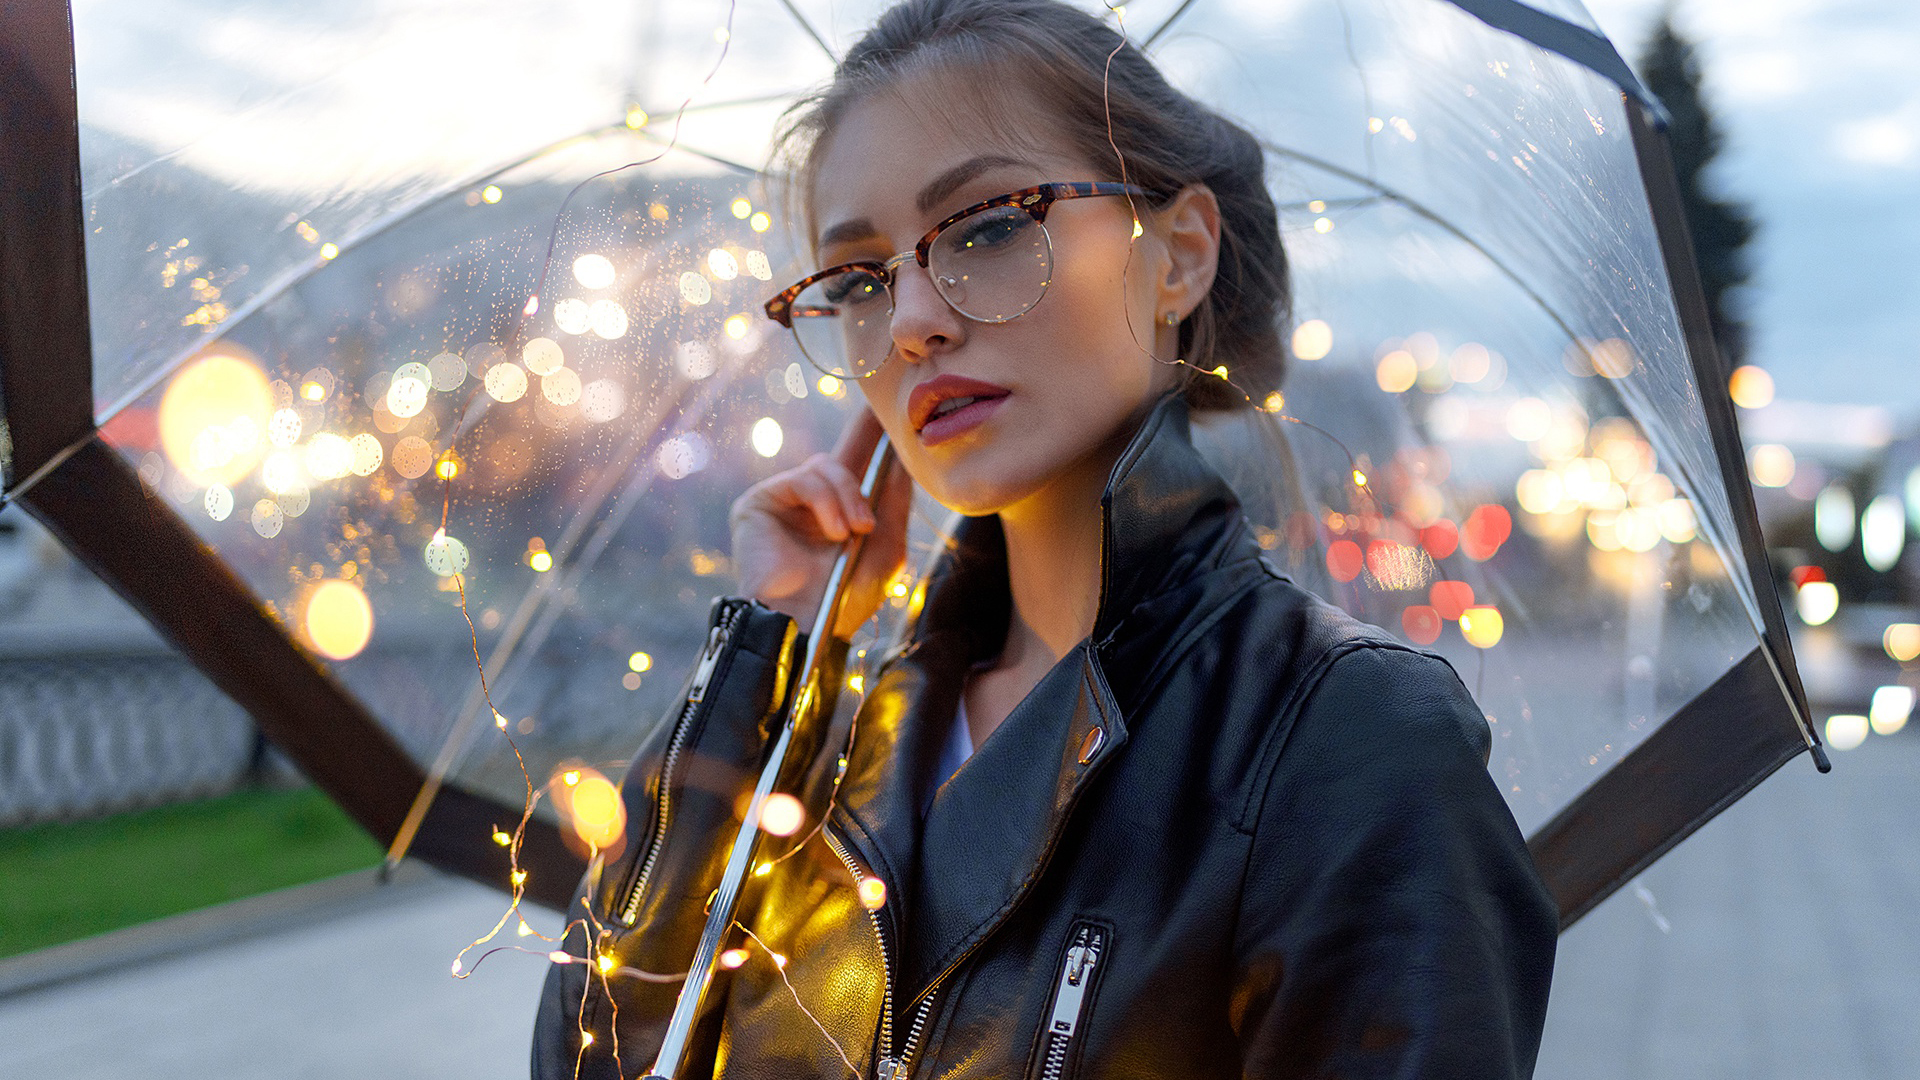 Girl Model With Black Leather Coat And A Glass Is Having Umbrella 2K Model